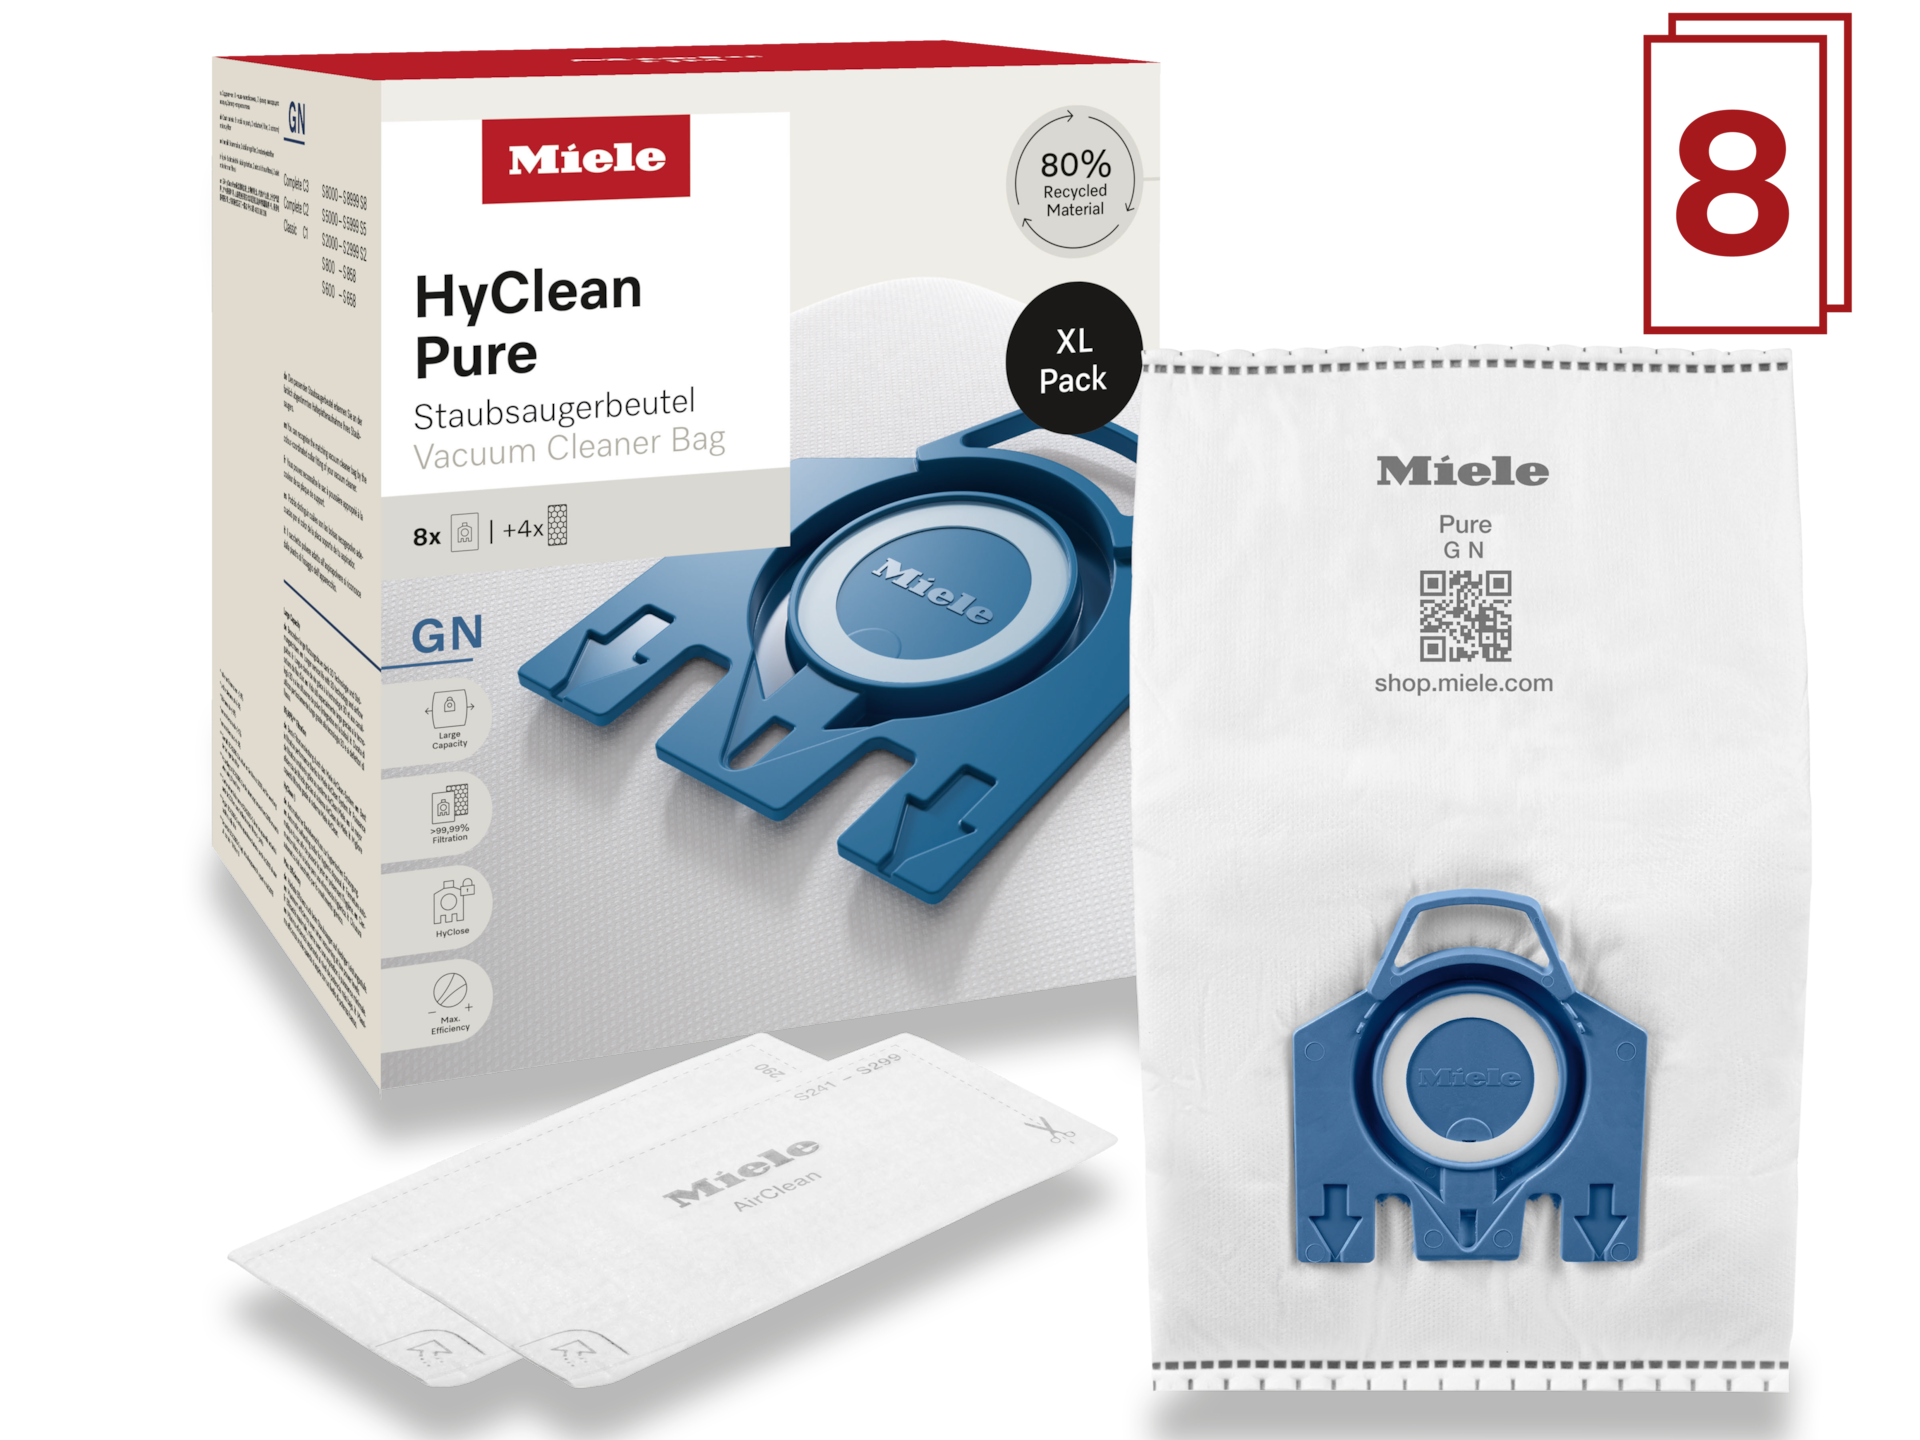 Accesorios - GN XL HyClean Pure - 2